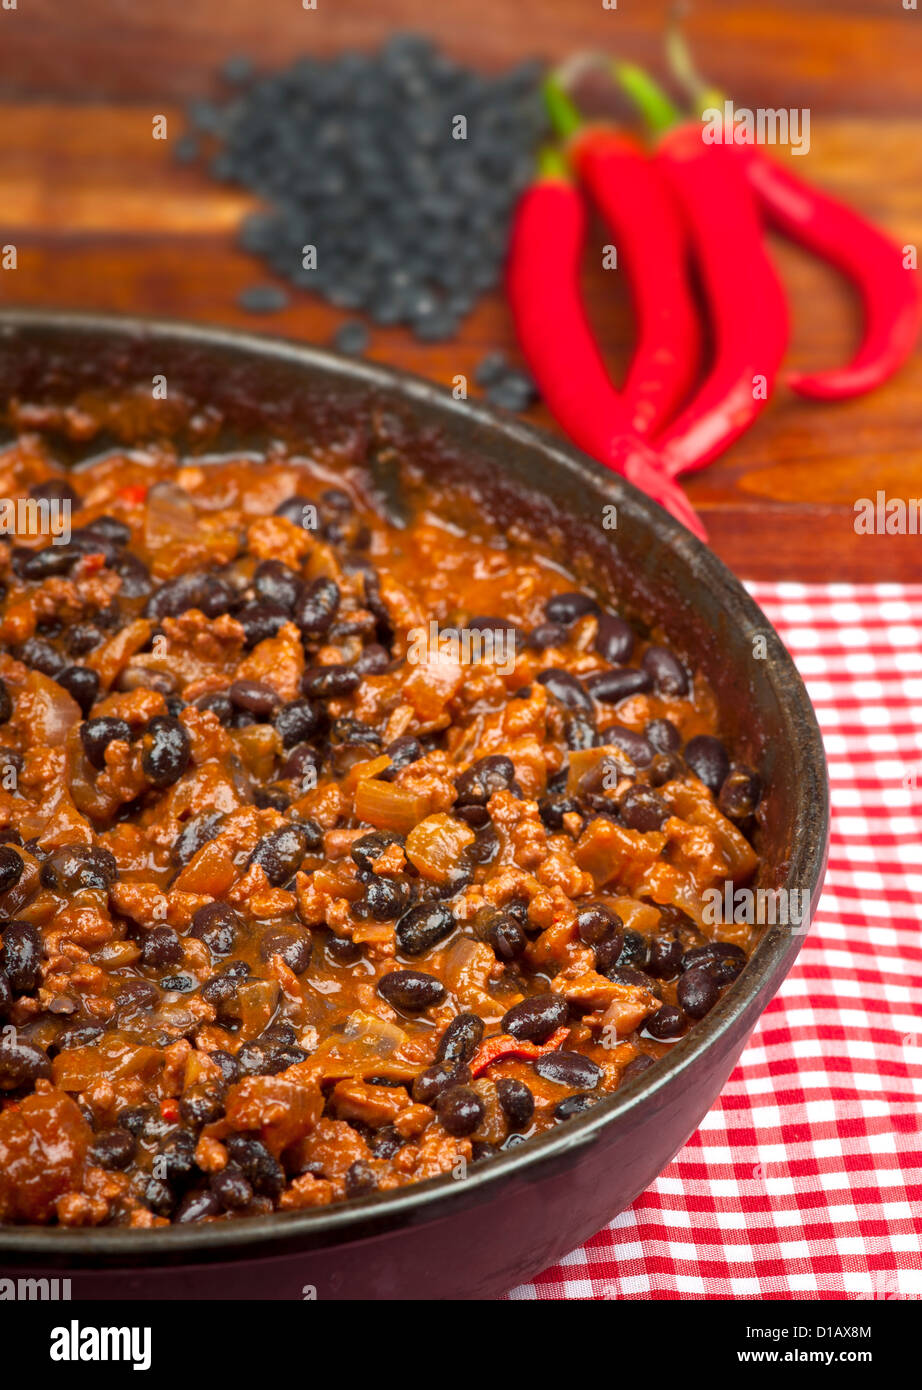 Hot and spicy Chili con Carne in the frying pan with rice. Whole red peppers and raw black beans in the background. Stock Photo